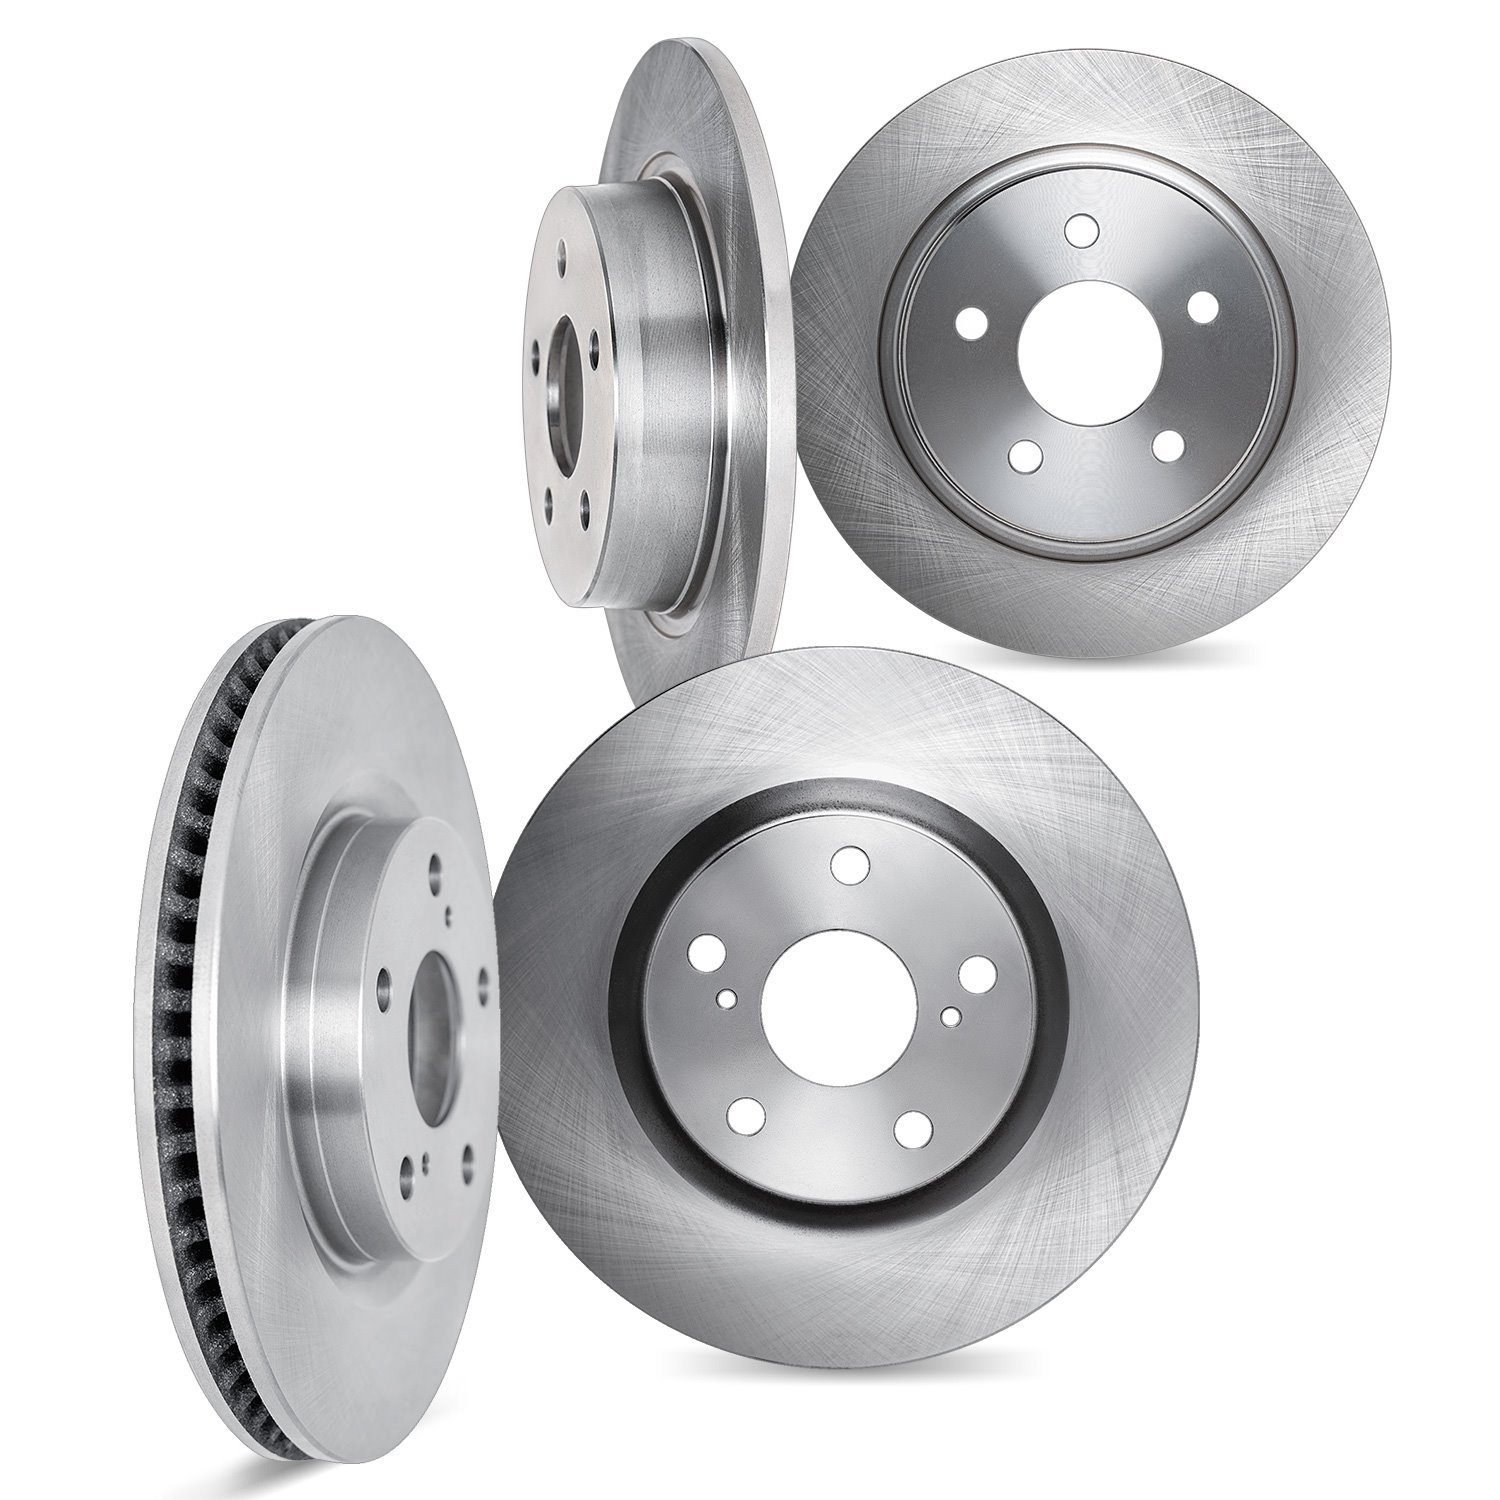 6004-42042 Brake Rotors, Fits Select Mopar, Position: Front and Rear